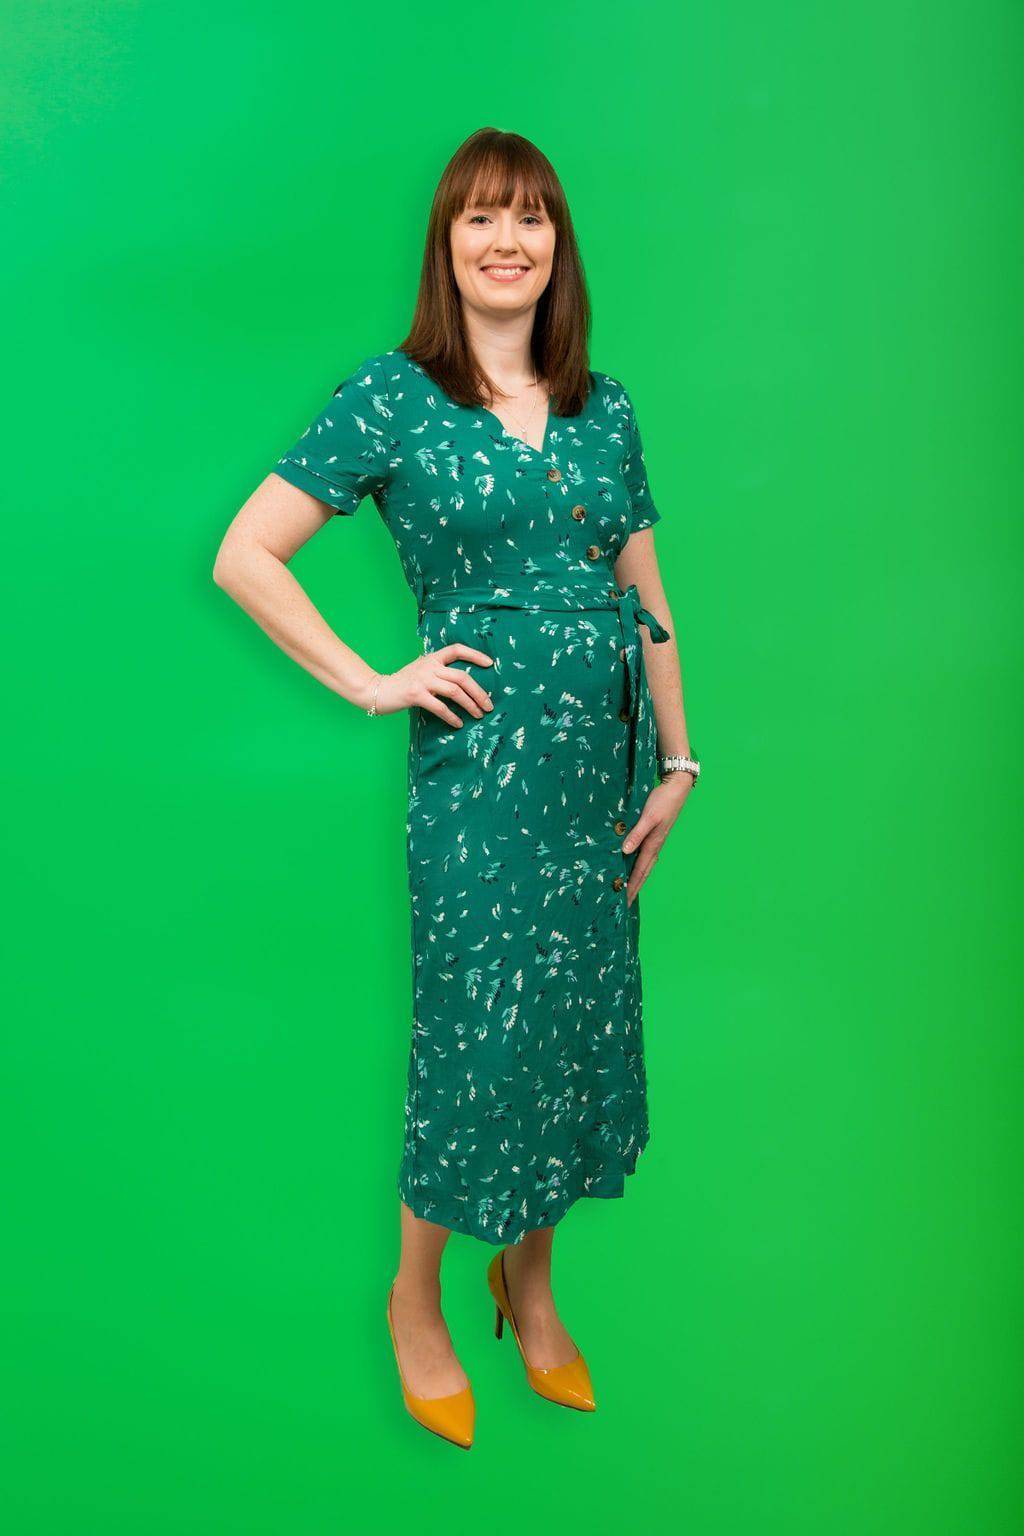 Grace & Mila Elegant green mid-length dress with short sleeves - Your Style Your Story